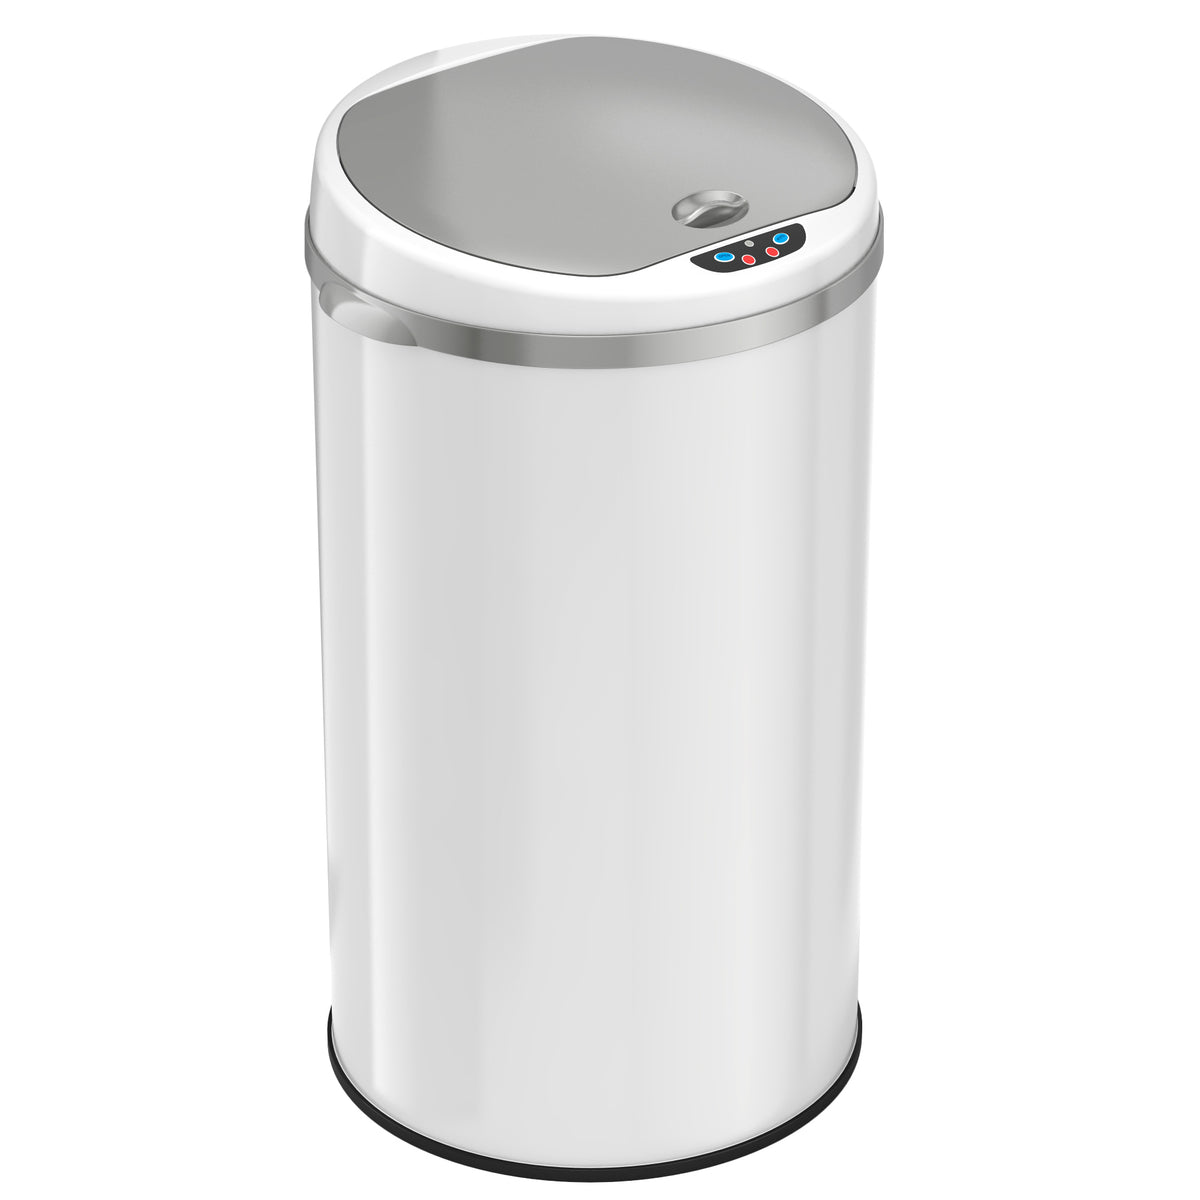 iTouchless 8 Gallon White Stainless Steel Sensor Trash Can with Odor Filter